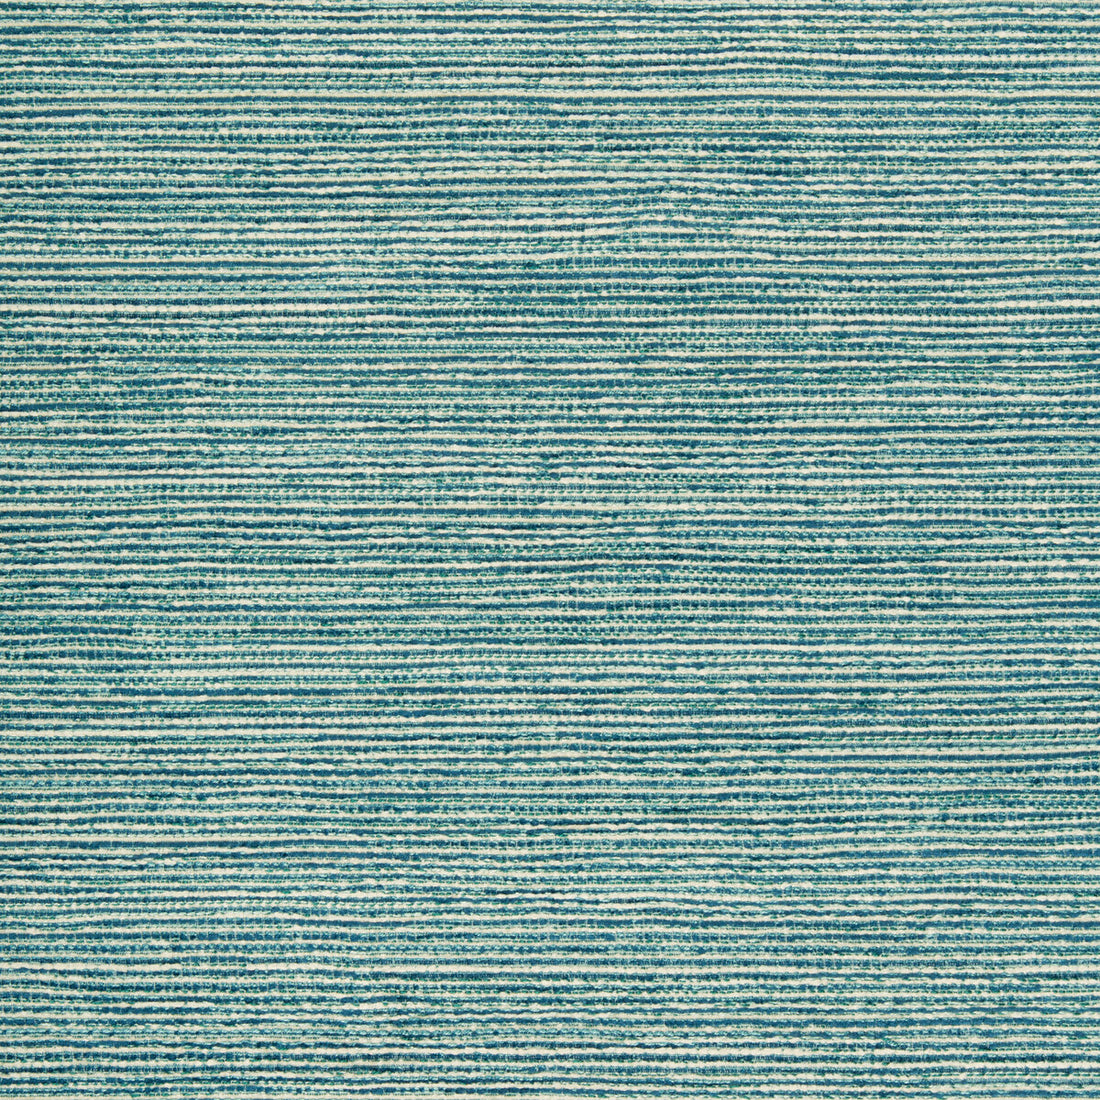 Kravet Design fabric in 34696-513 color - pattern 34696.513.0 - by Kravet Design in the Performance Crypton Home collection